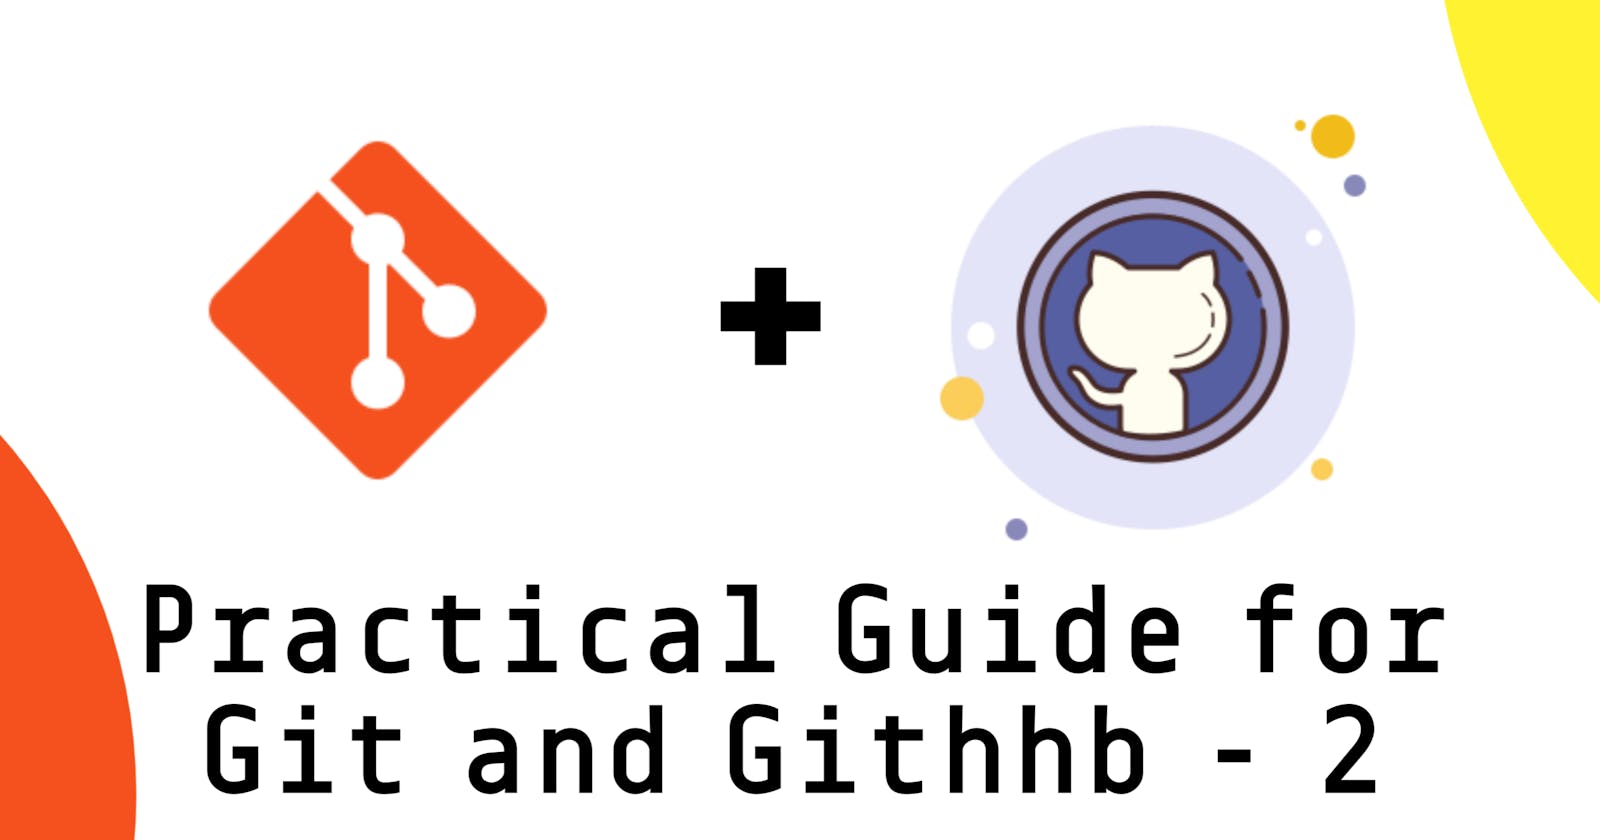 Guide to learn Git and GitHub, Part - 2